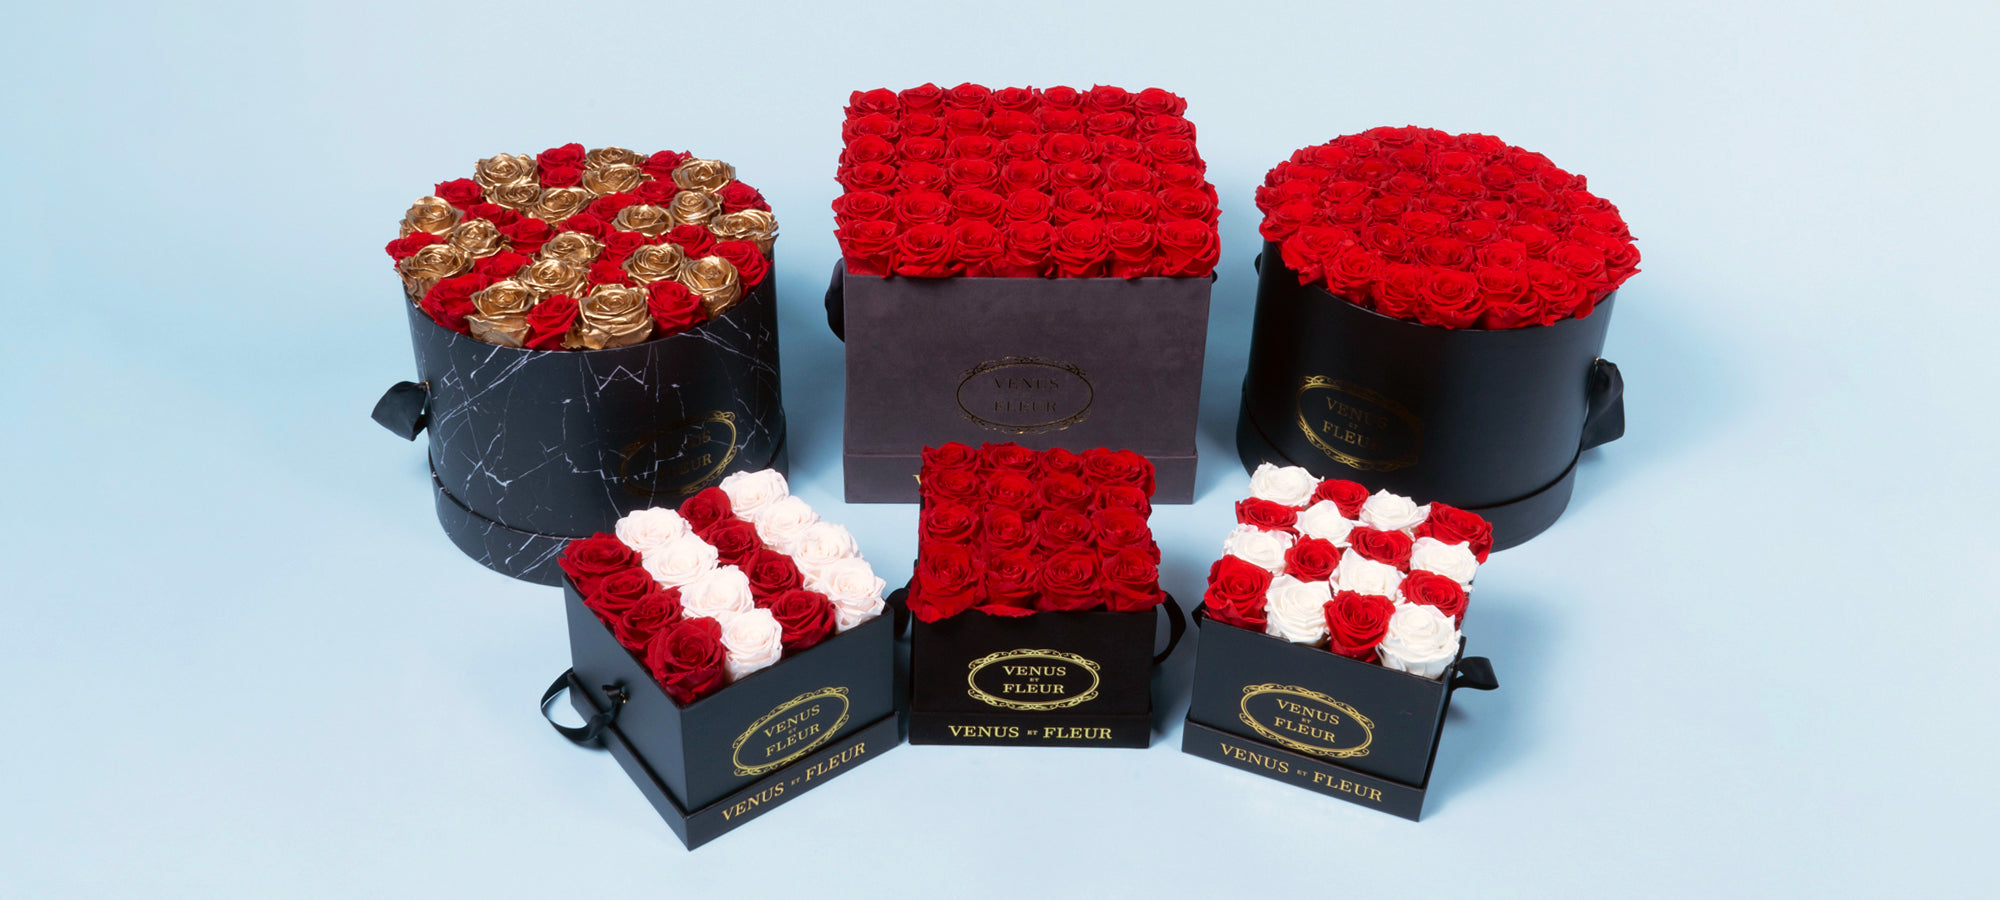 Long-Lasting Gifts Your Sweetheart Will Love